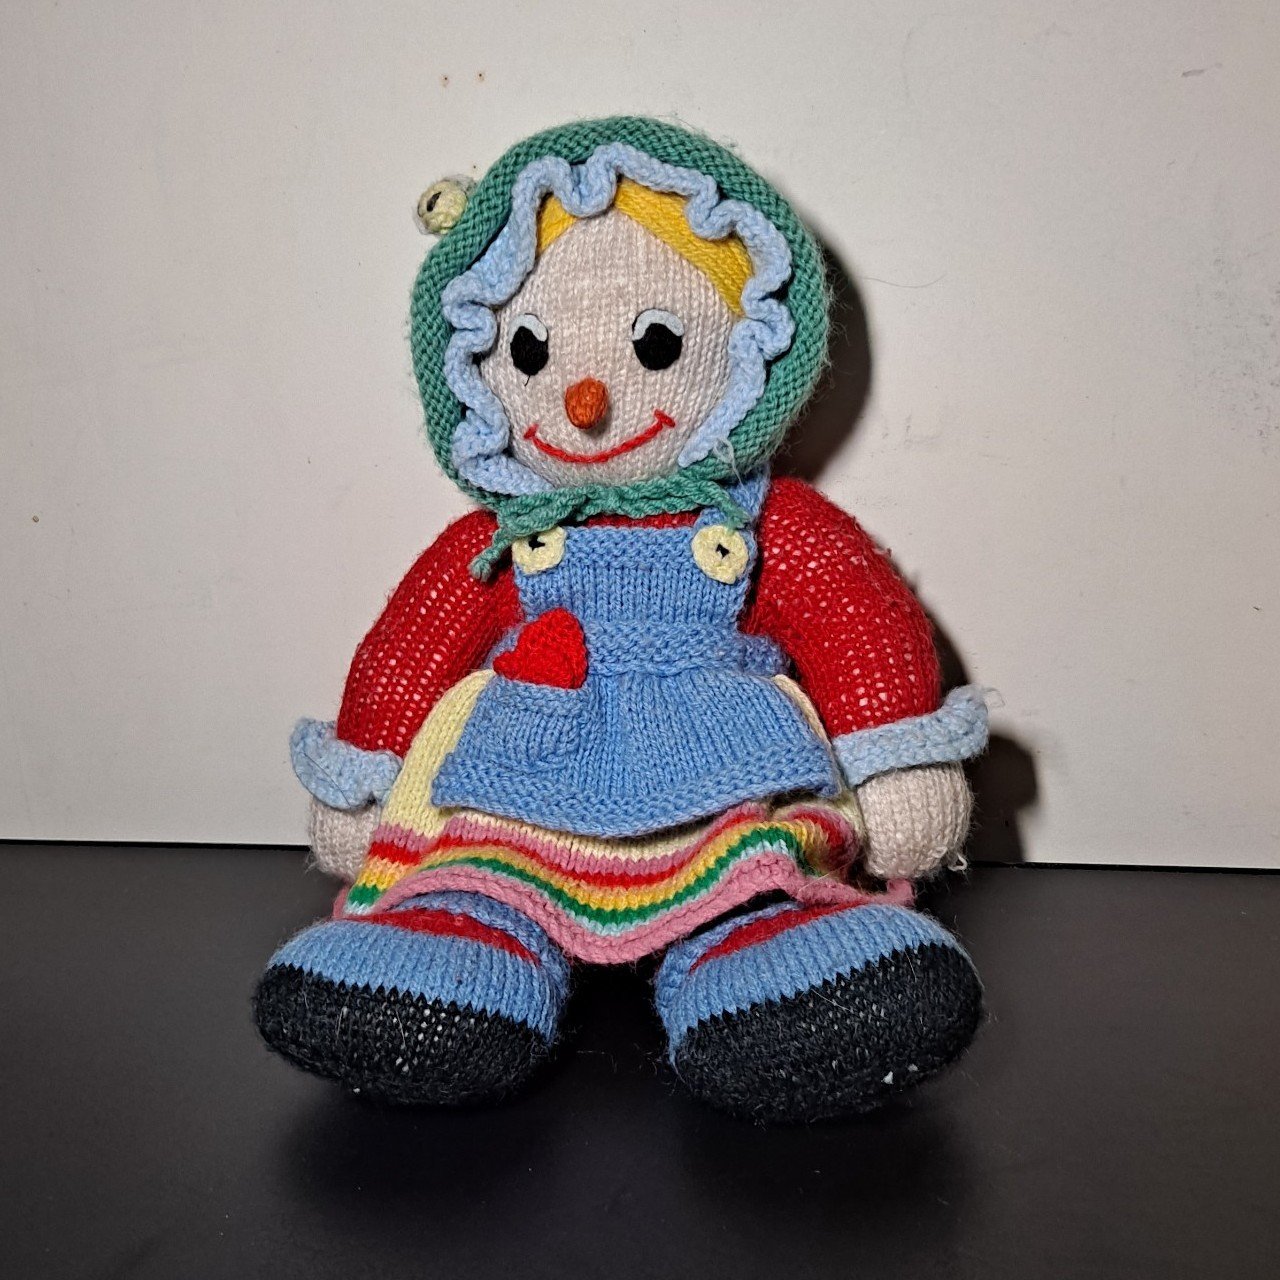 Vintage Knitted Granny Core Clown Doll with Dress, Bag and Bee Bonnet. NzNlhFfQ8